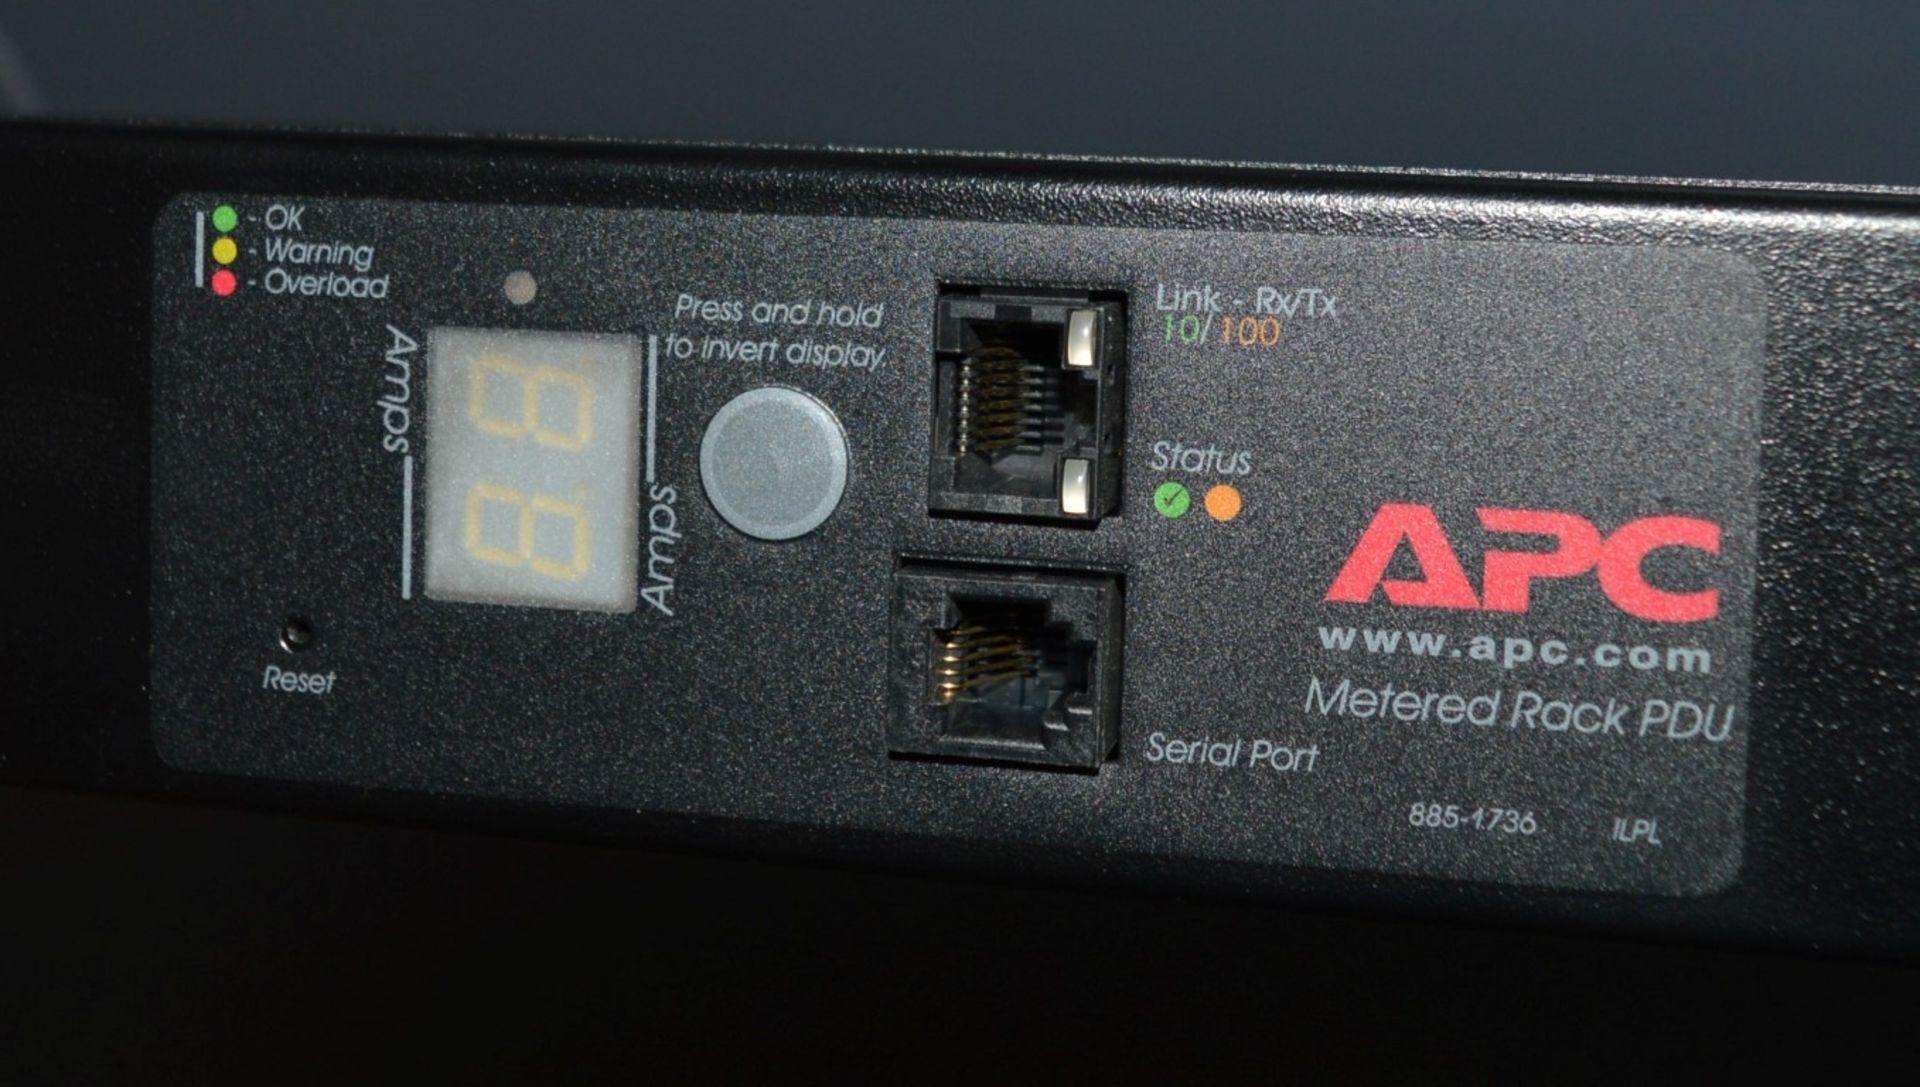 1 x APC Metered Rack PDU - Model AP7852 - 230V 16A - Features 24 Output Connectors - CL106 - Removed - Image 2 of 8